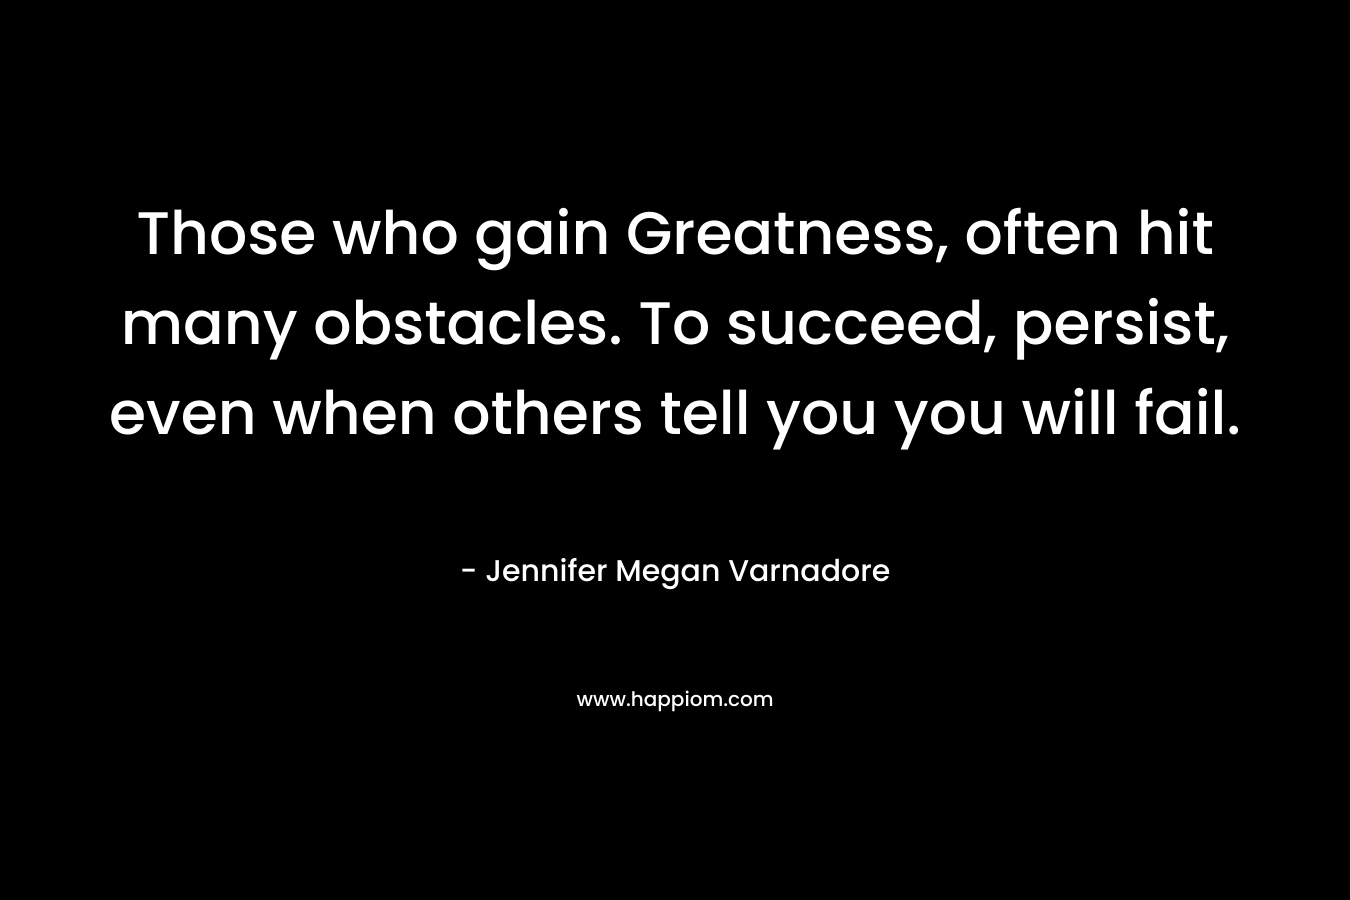 Those who gain Greatness, often hit many obstacles. To succeed, persist, even when others tell you you will fail.